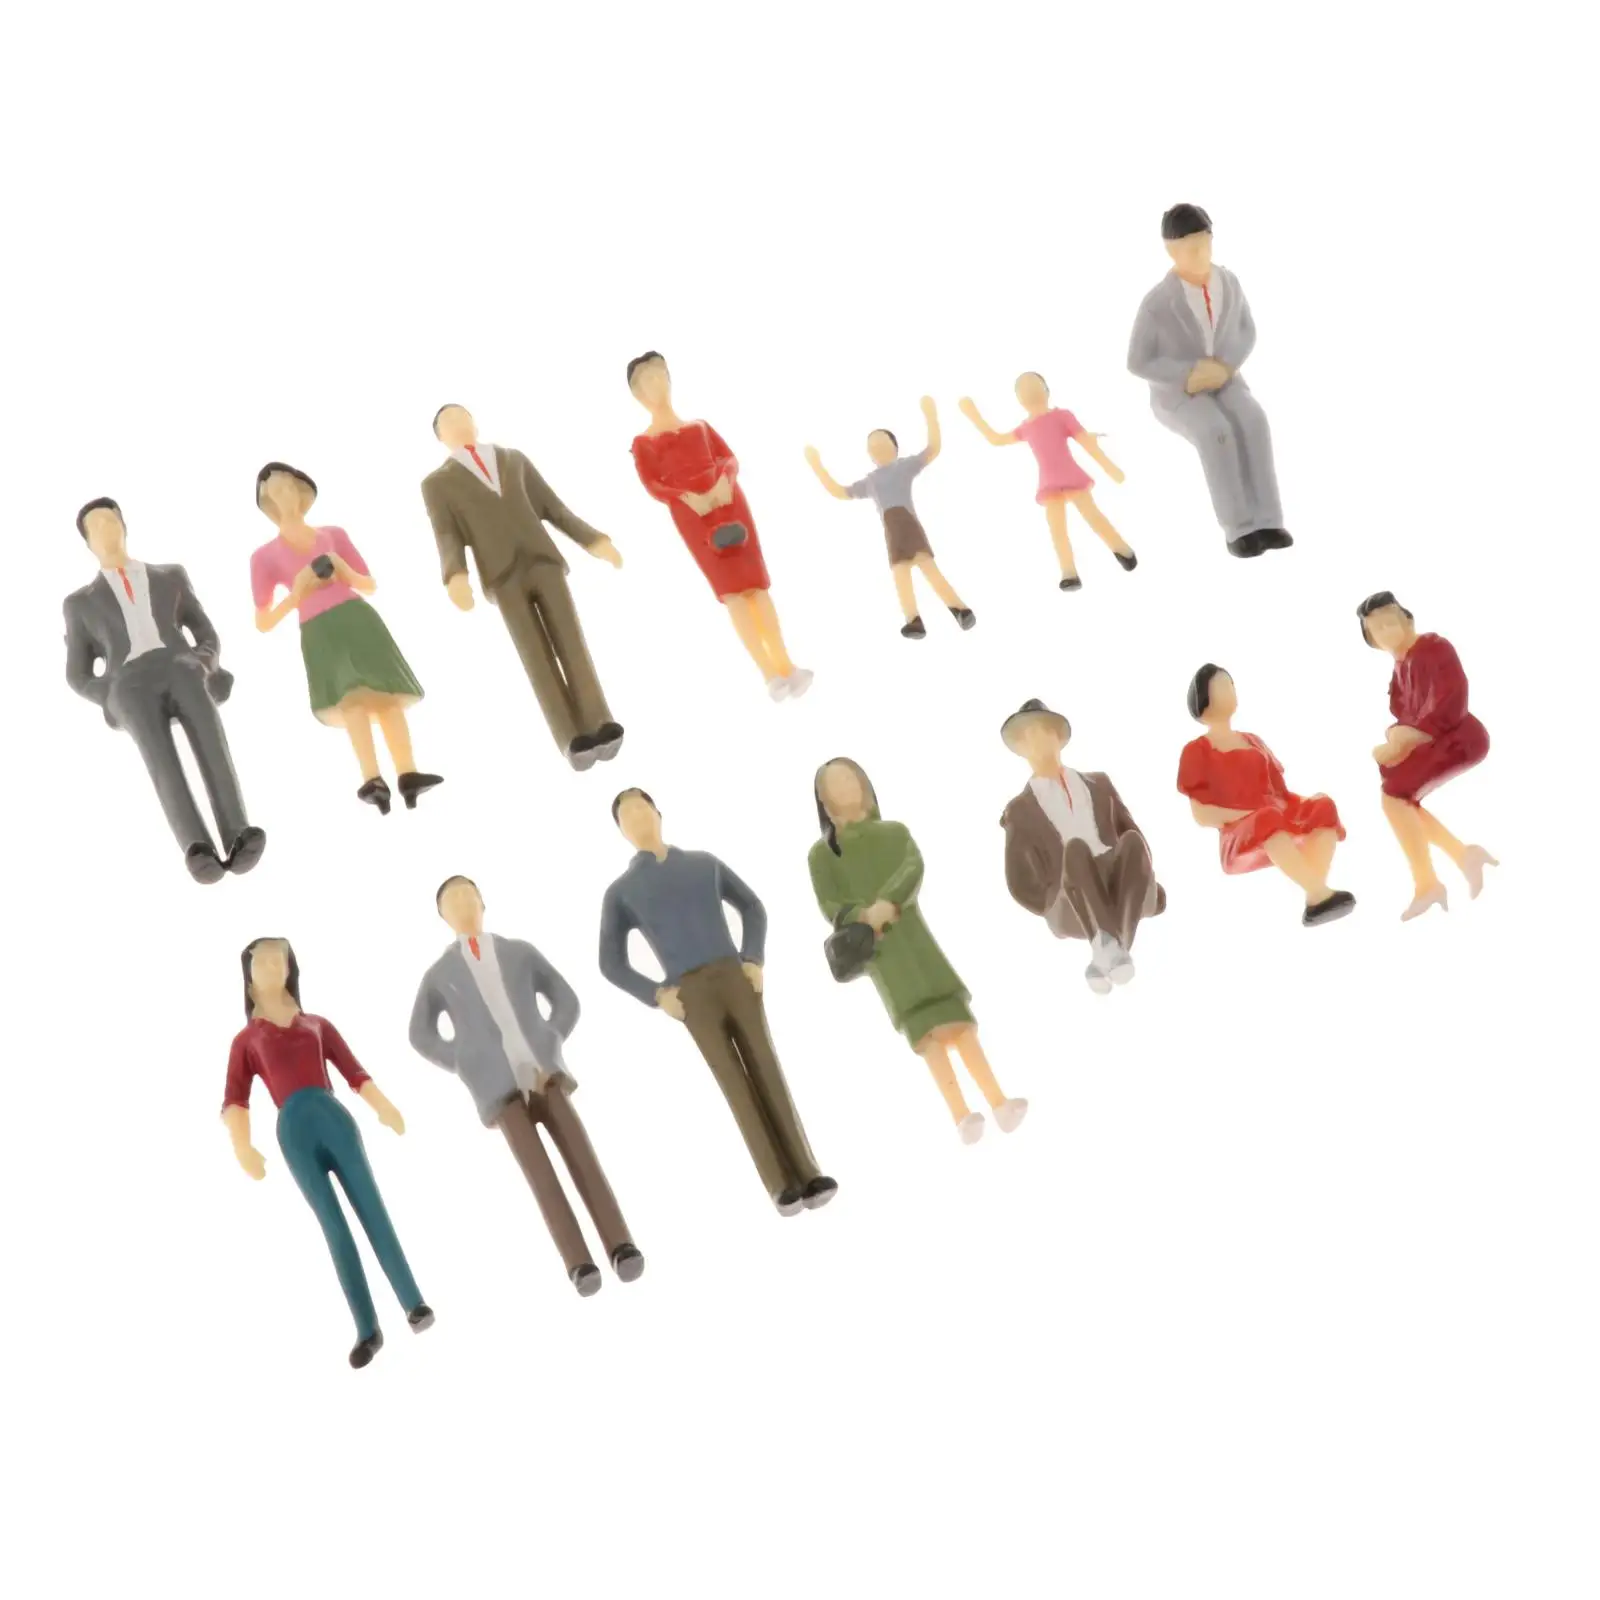 14Pcs Miniature Figures Model, G Scale 1:30 Seated and Standing People Figures Passengers Train Railway Sand Table Layout